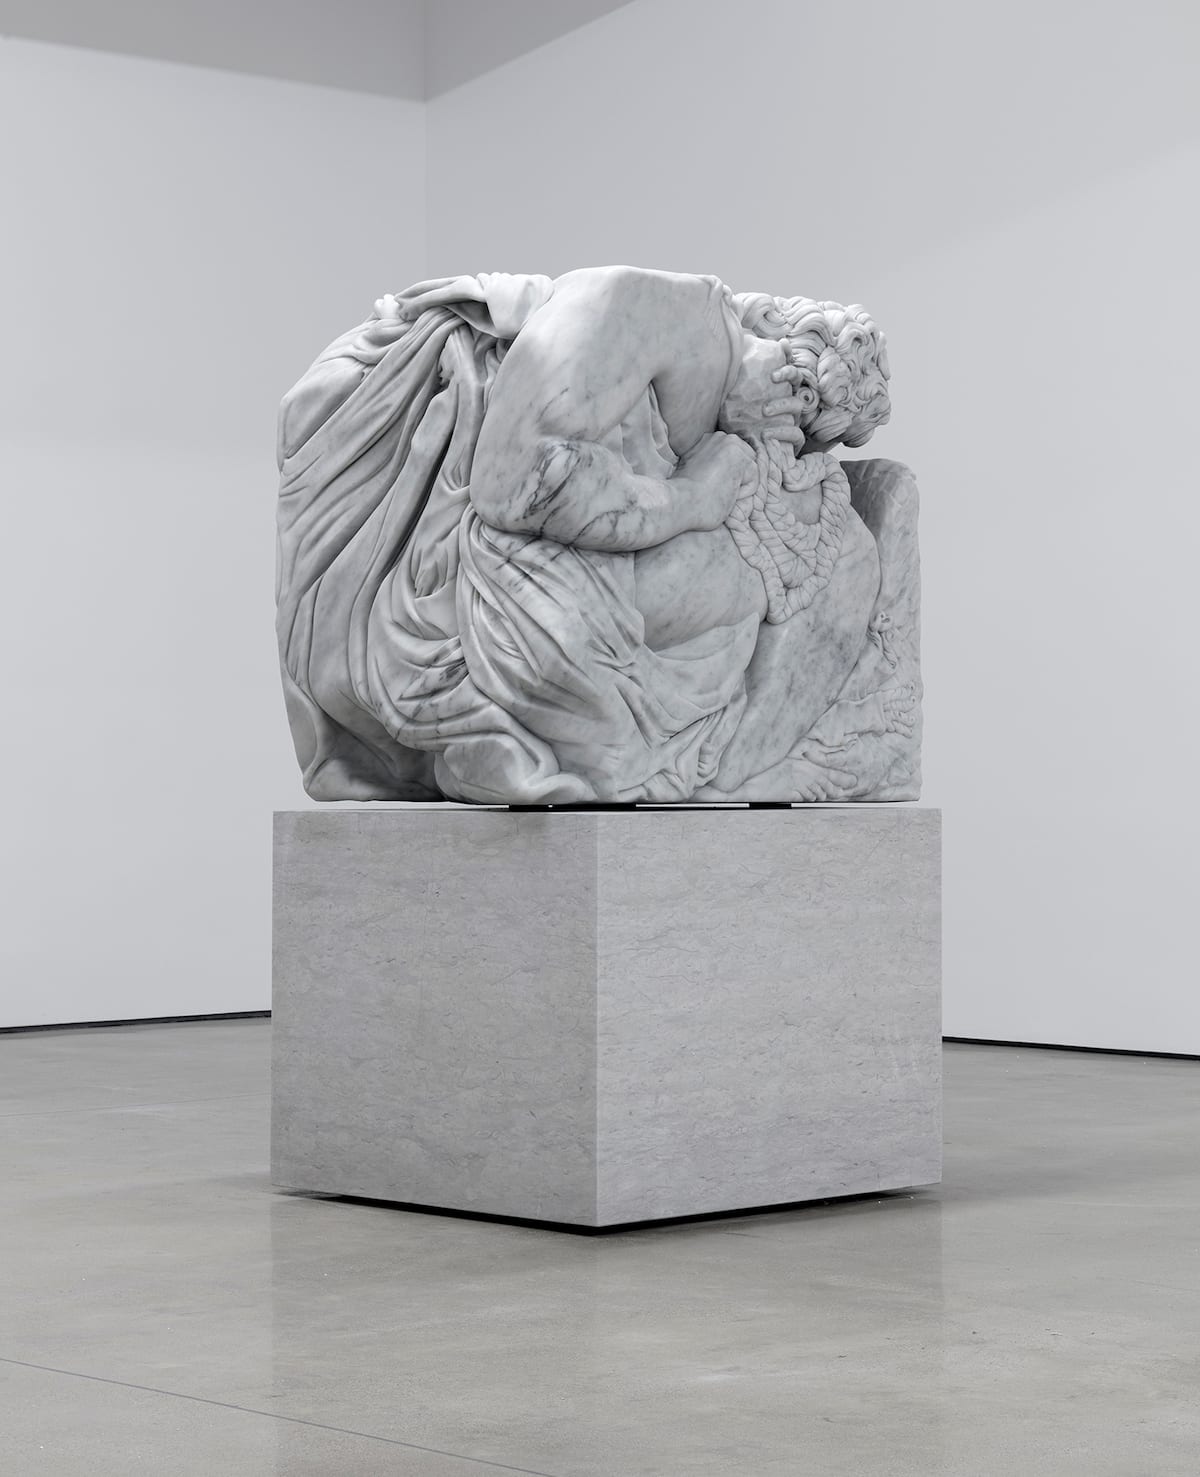 Artist Adam Parker Smith Compresses Classical Sculptures Into Small Marble Cubes (6)